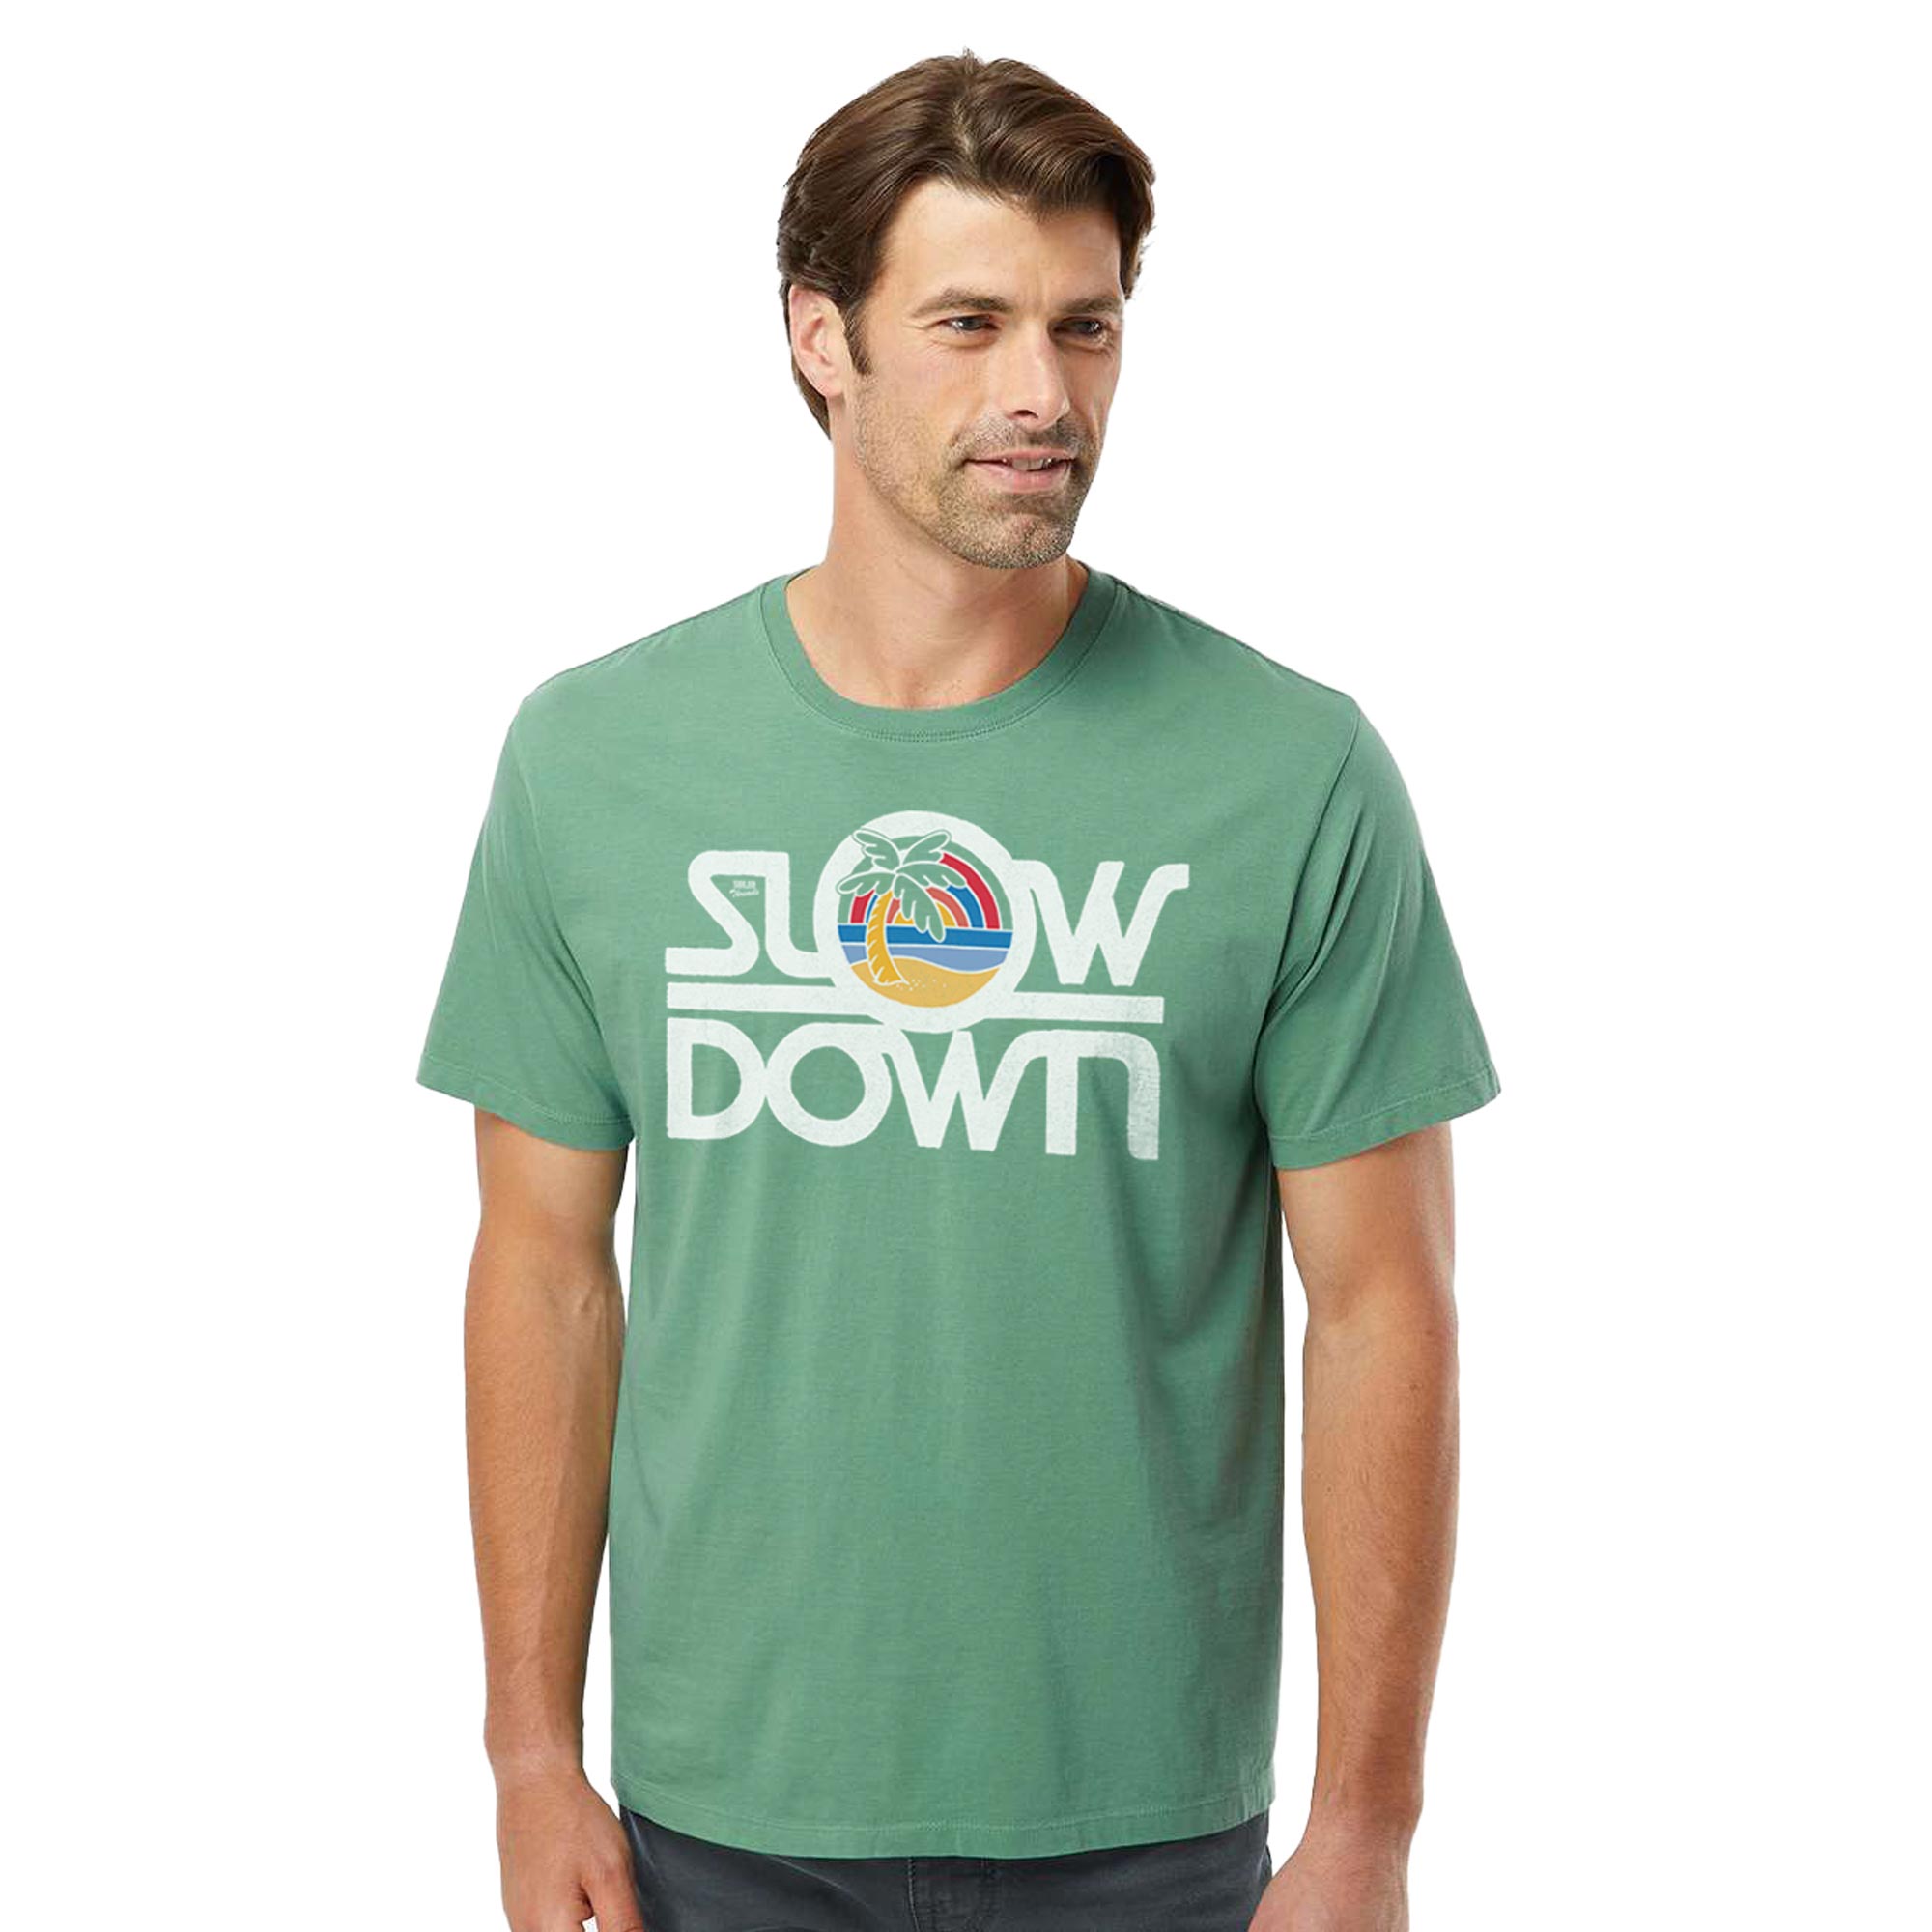 Slow Down Vintage Organic Cotton T-shirt | Cool Tropical Beach  Tee On Model | Solid Threads